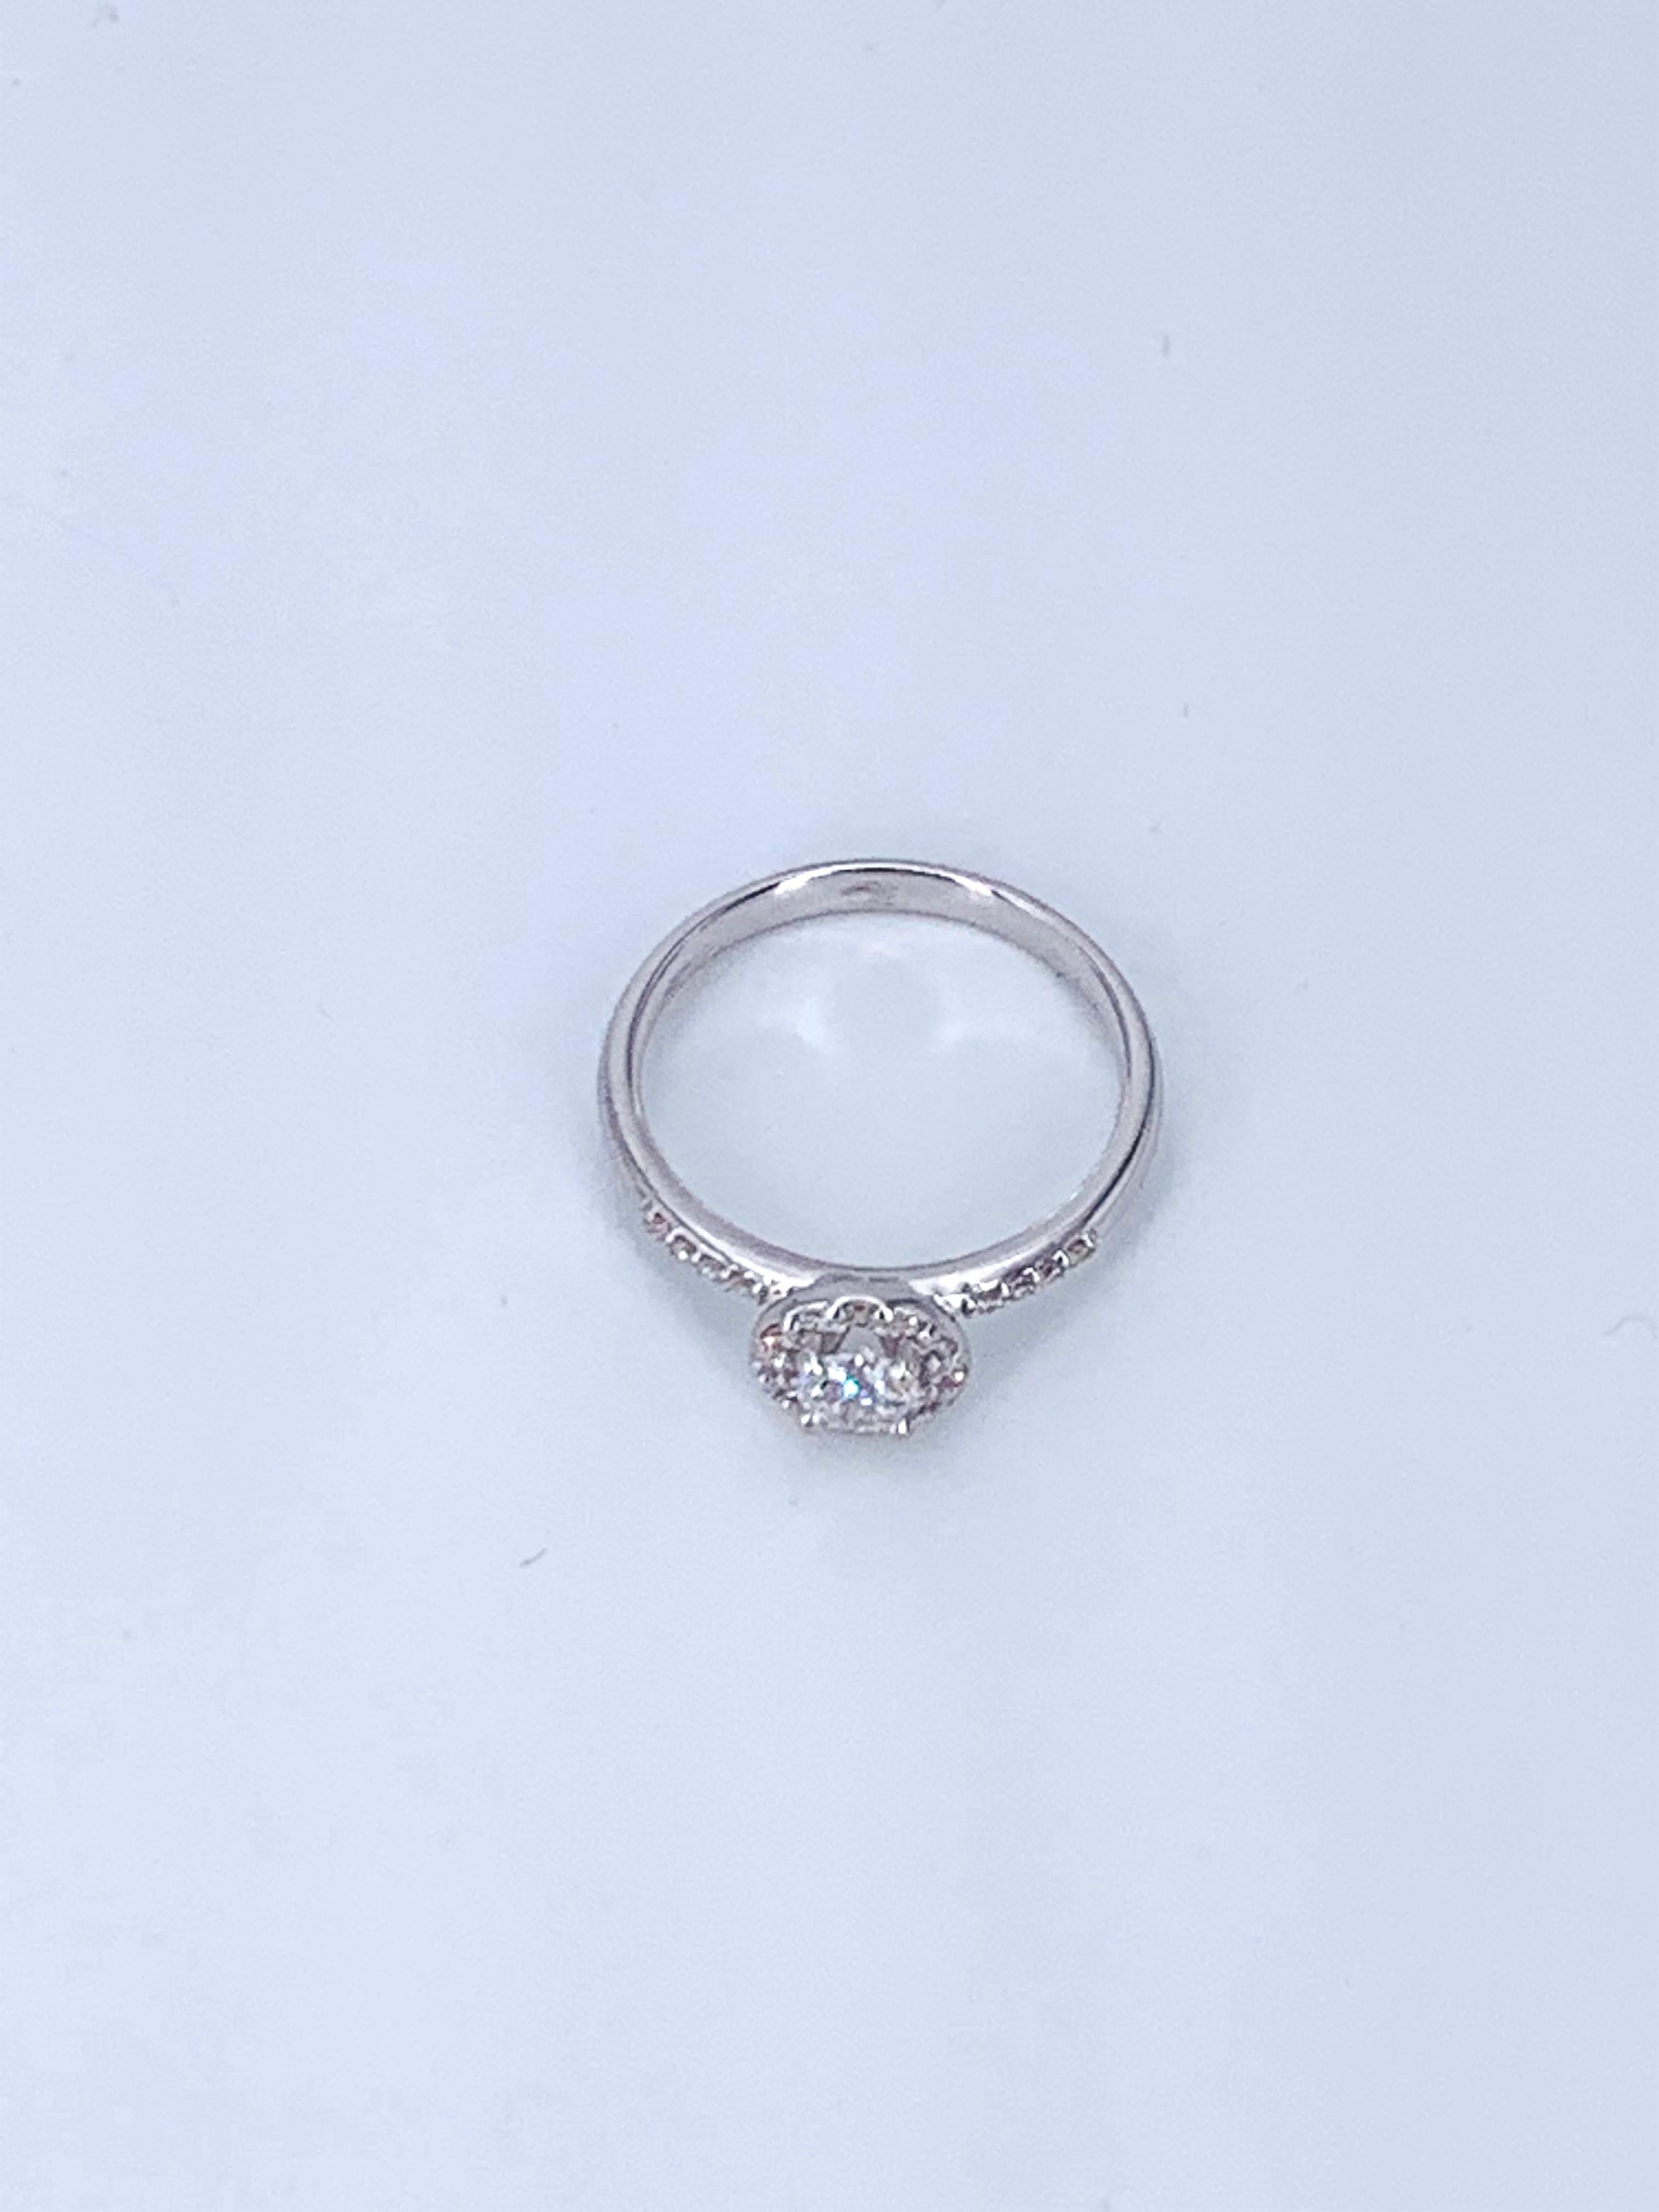 This 0.37 carat half pave solitaire is from the Jennifer Collection, holds the centre Diamond in a halo setting and covers the face of the ring band in small Diamonds. Adding brilliance and beauty to any finger that wears it. 

Set in 18Kt white